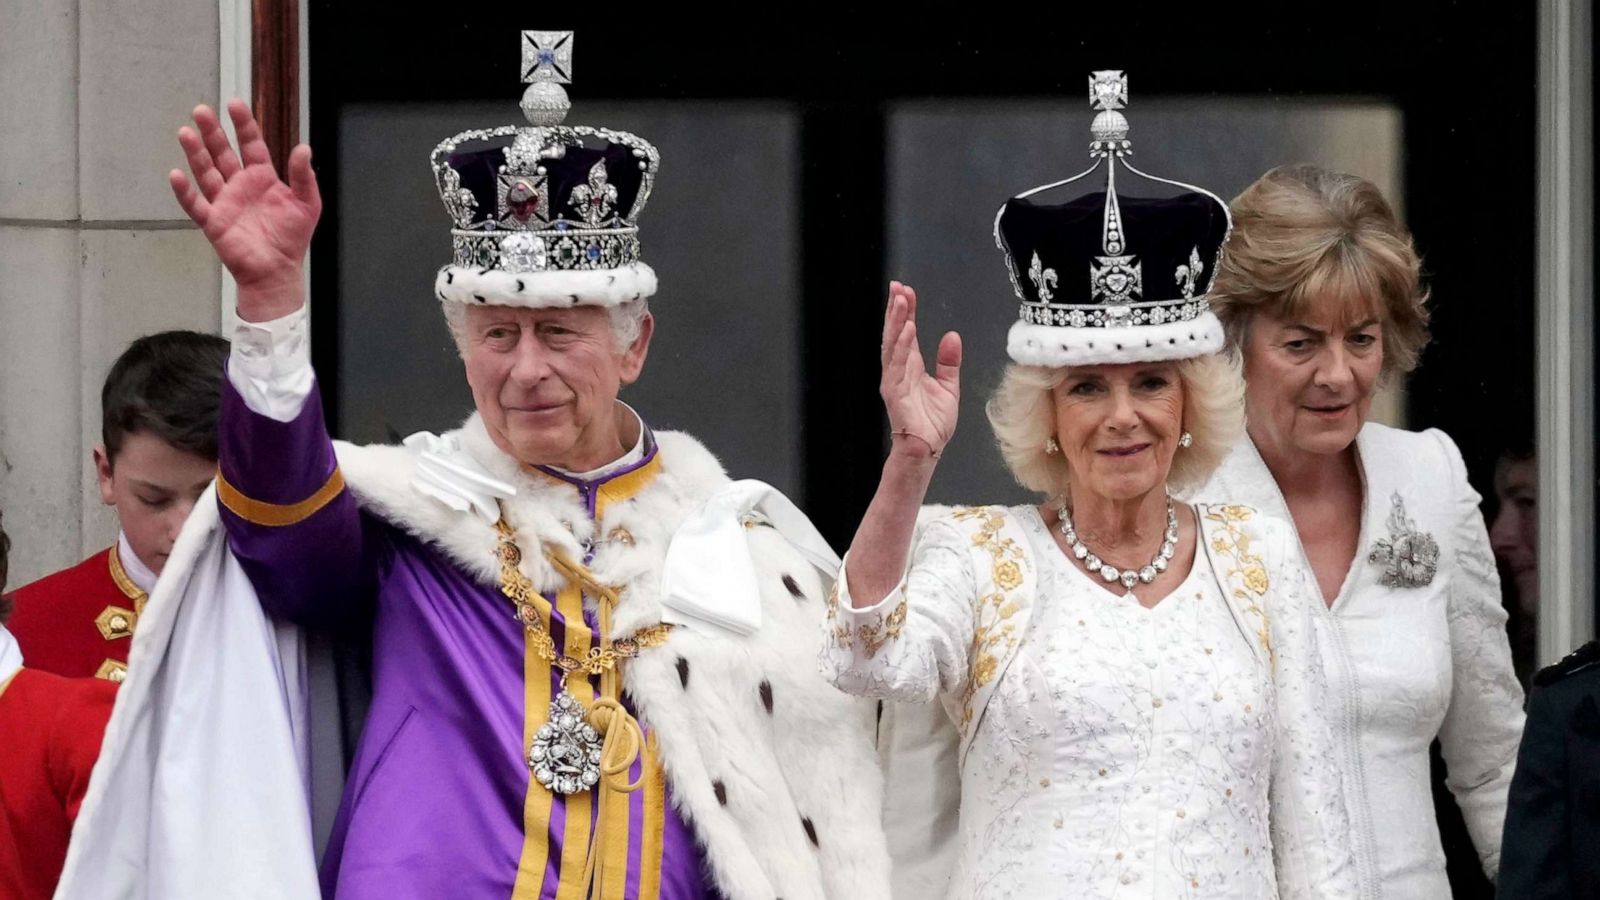 The royal family's title changes after Queen Elizabeth II's death